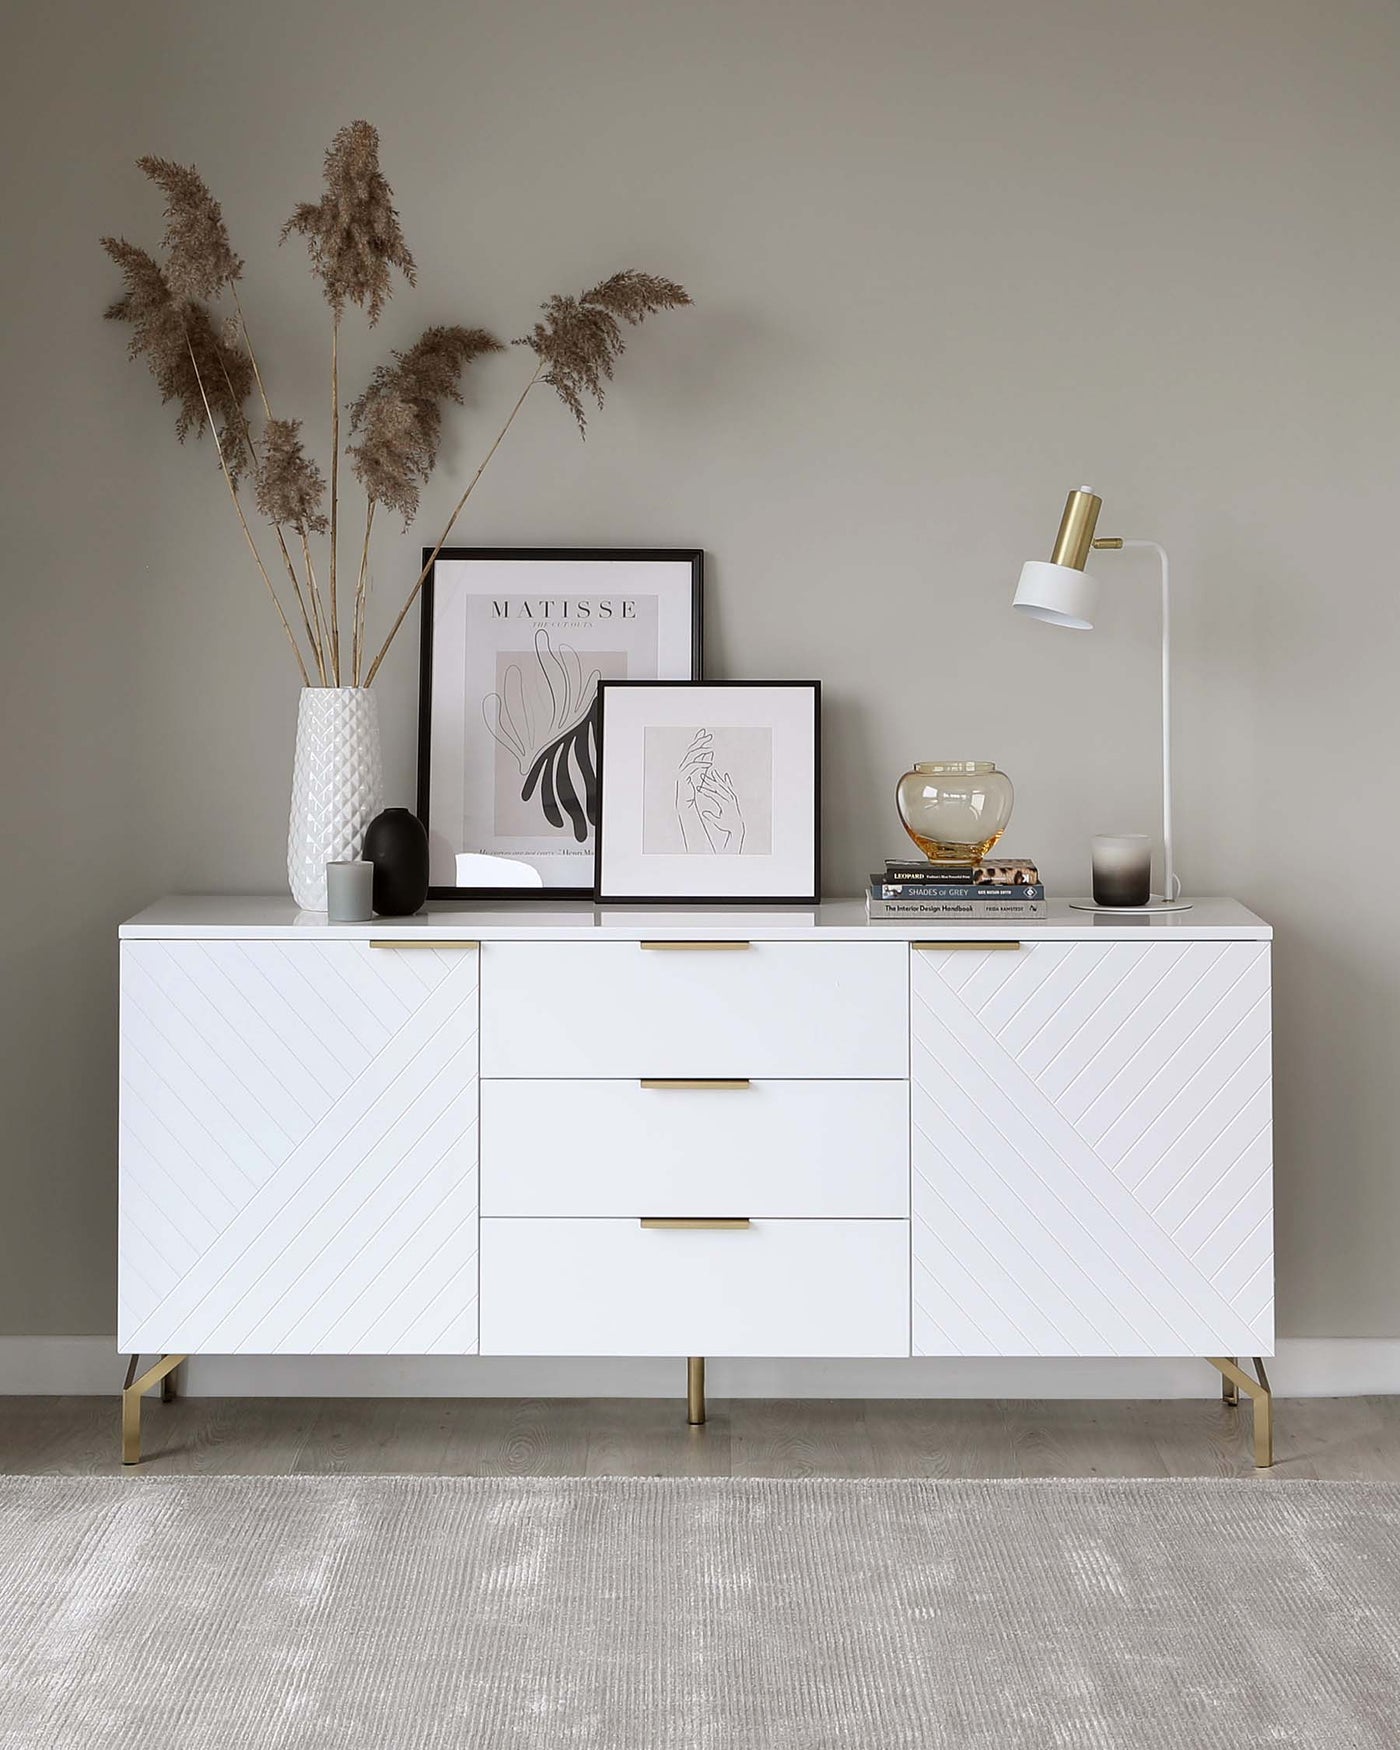 A modern white sideboard with a textured front, featuring angular lines and gold accents on the legs and drawer handles. The sideboard is adorned with decorative items including vases, framed artwork, books, and a table lamp. The scene is set against a neutral wall on top of a textured grey rug.